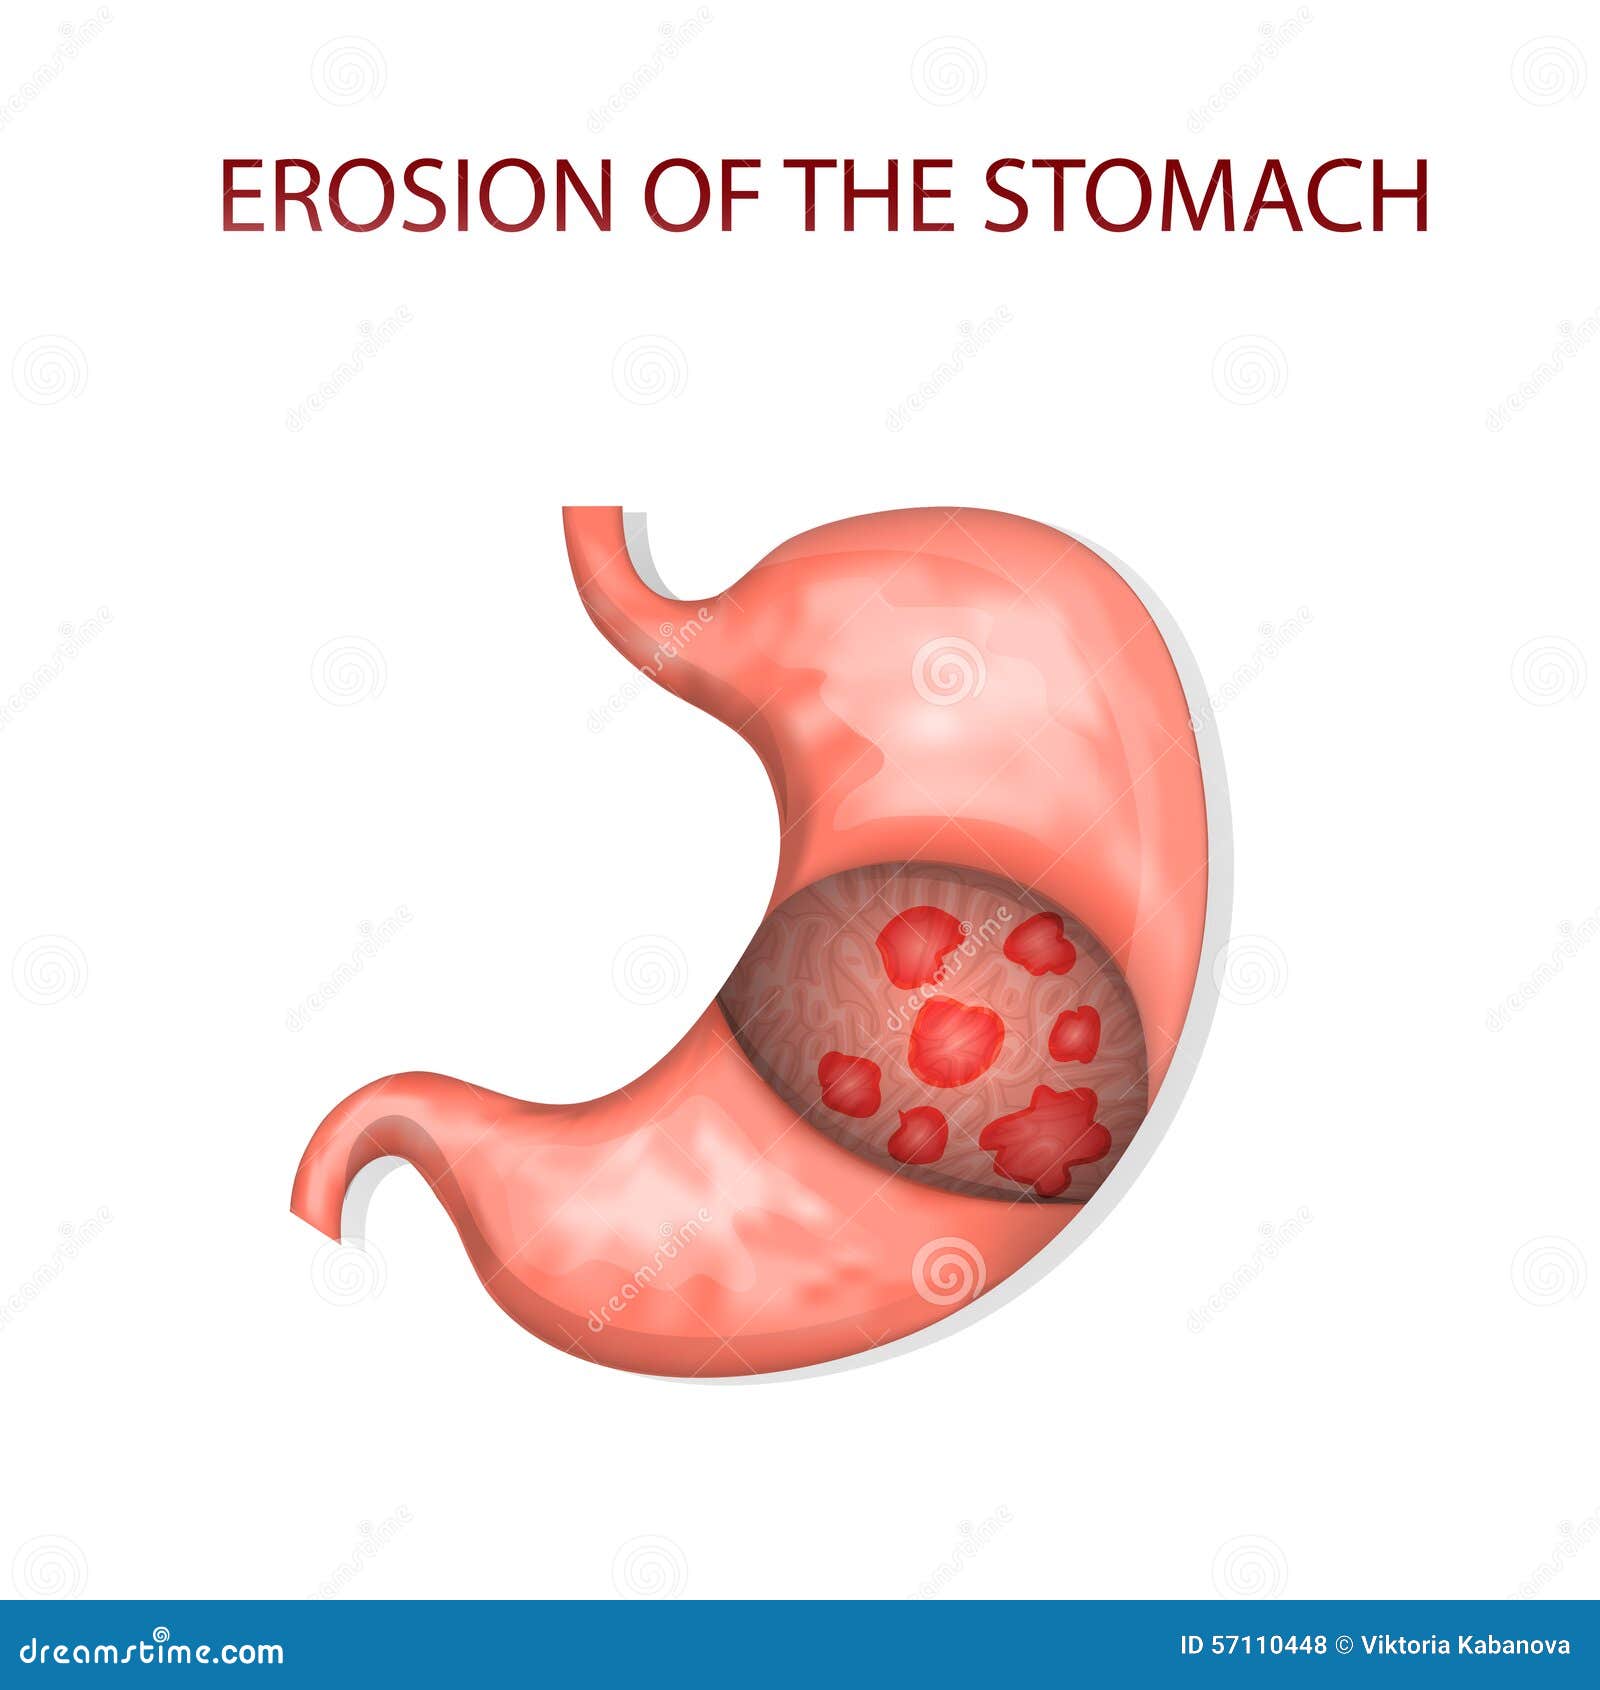 Albums 99+ Images erosion of the protective layer of the stomach Superb